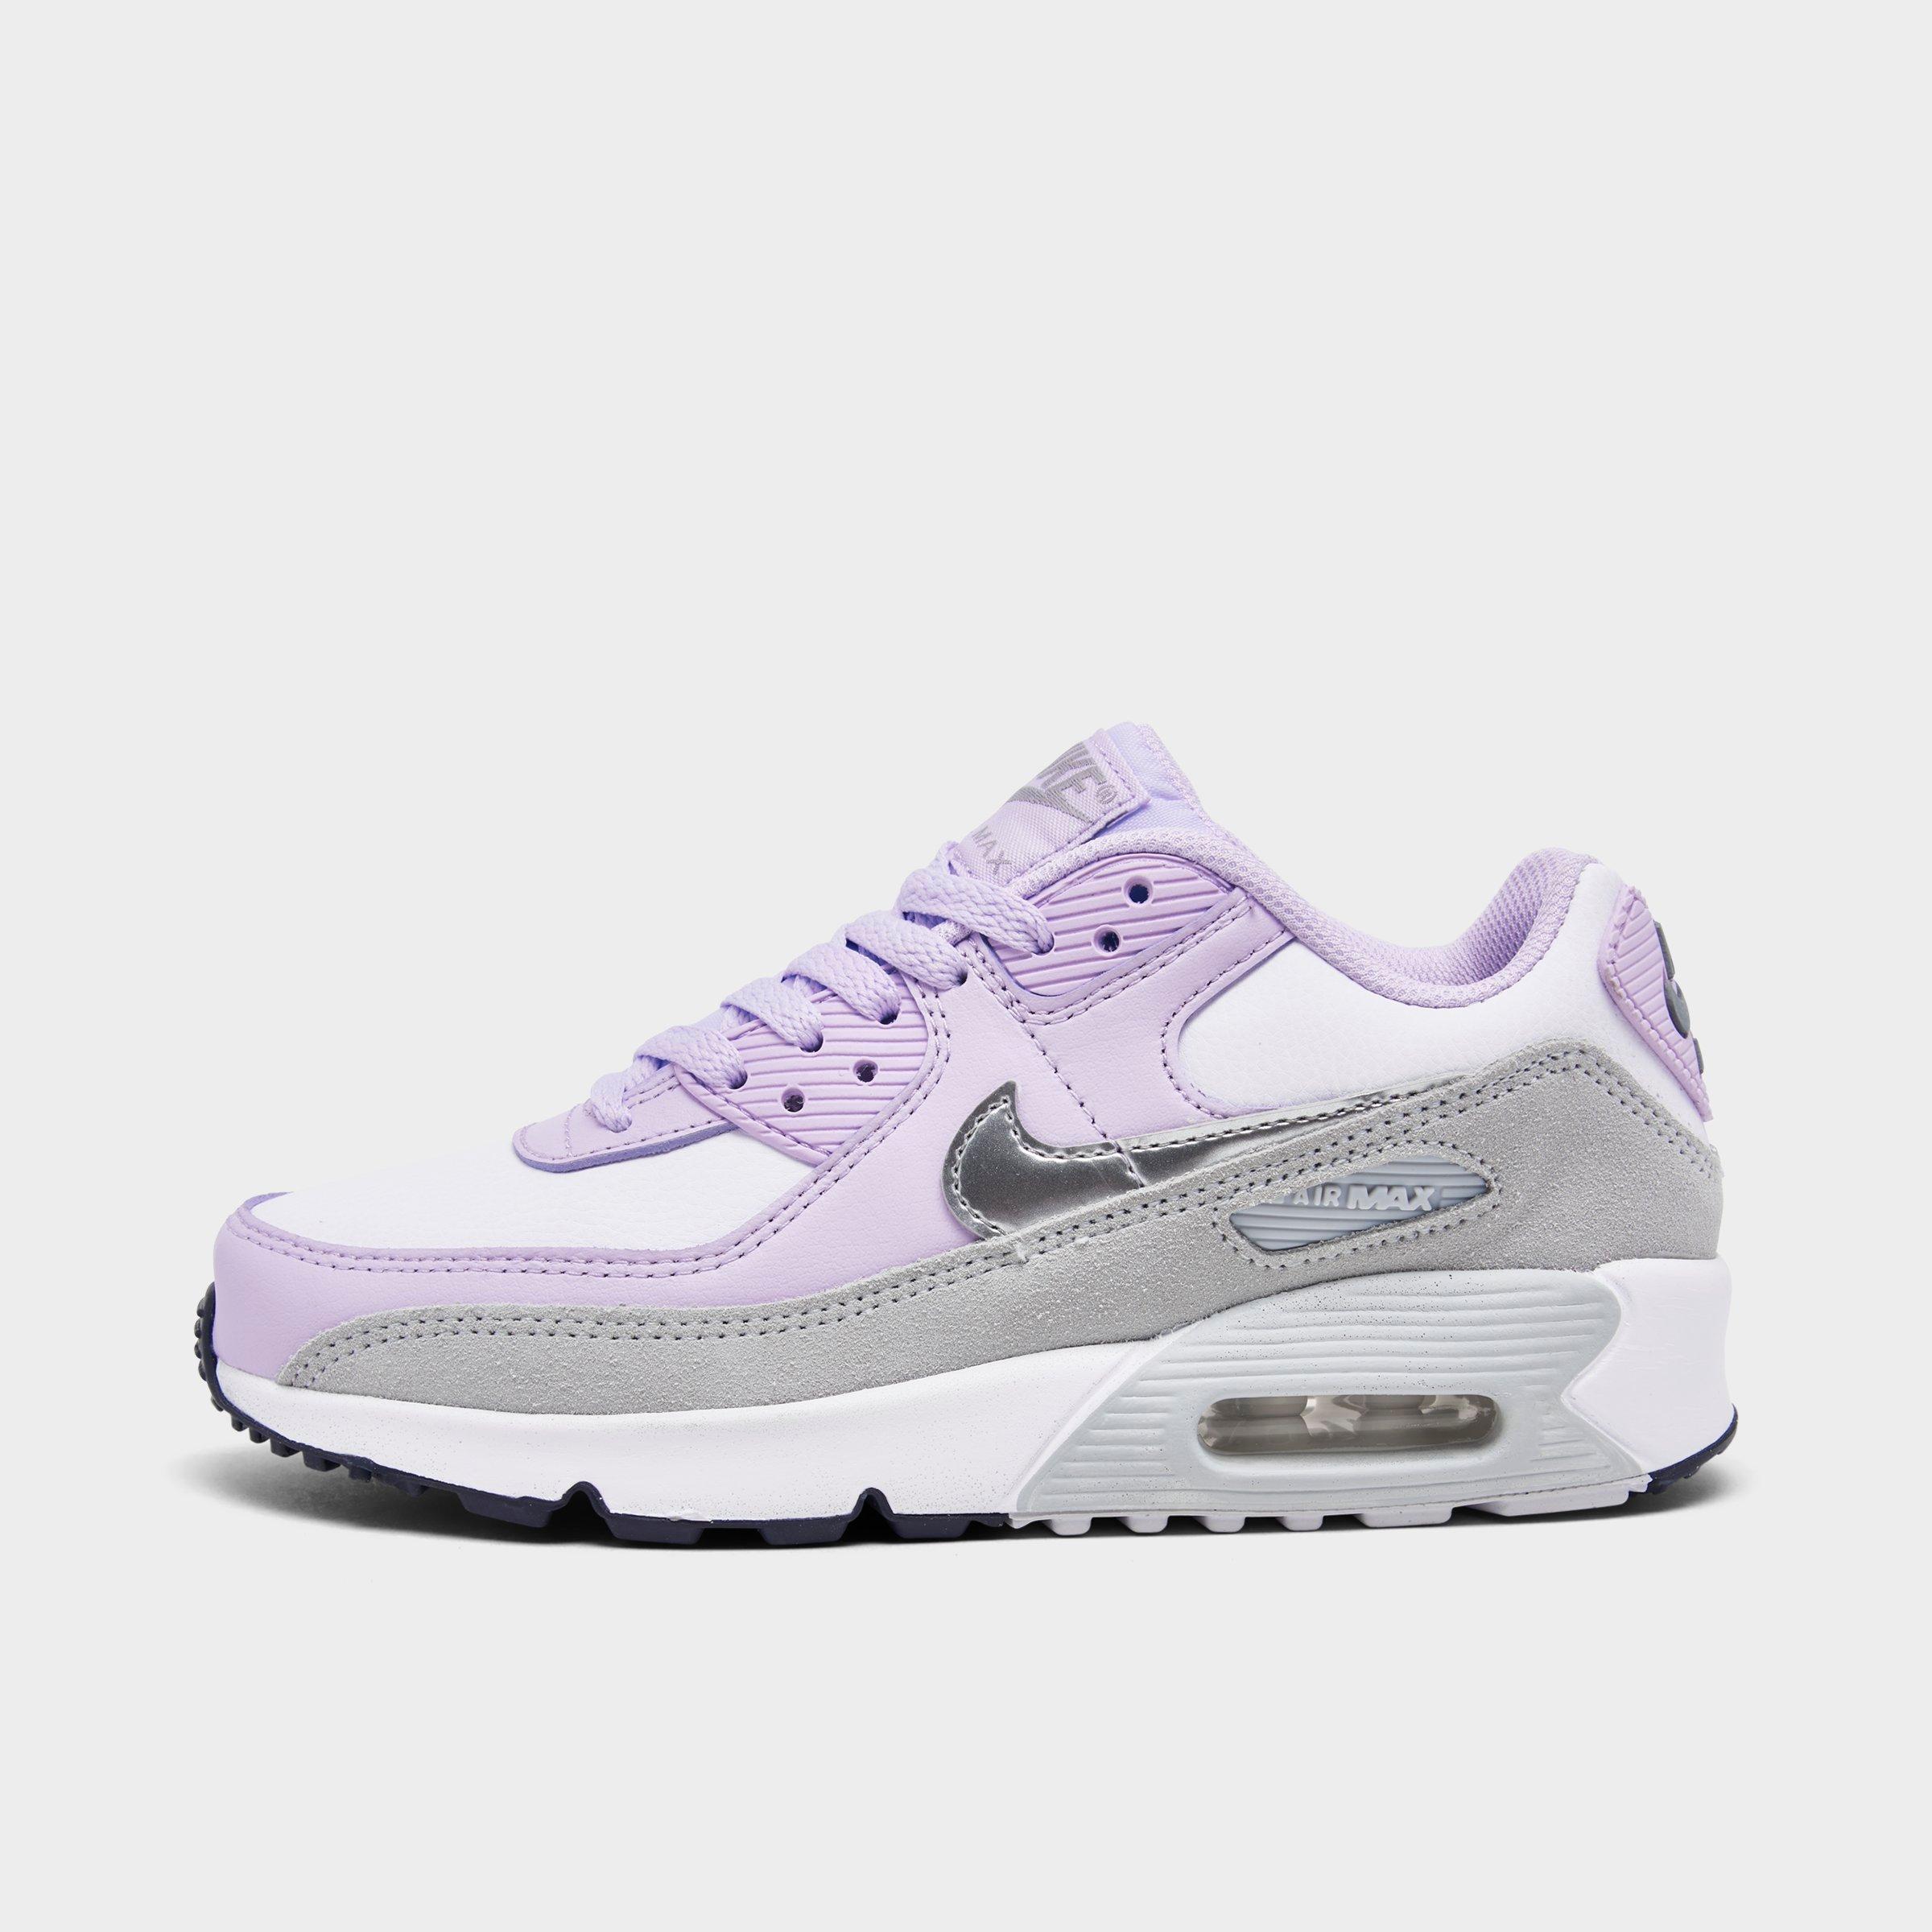 Nike Girls' Big Kids' Air Max 90 Casual Shoes In White/metallic Silver/violet Frost/pure Platinum